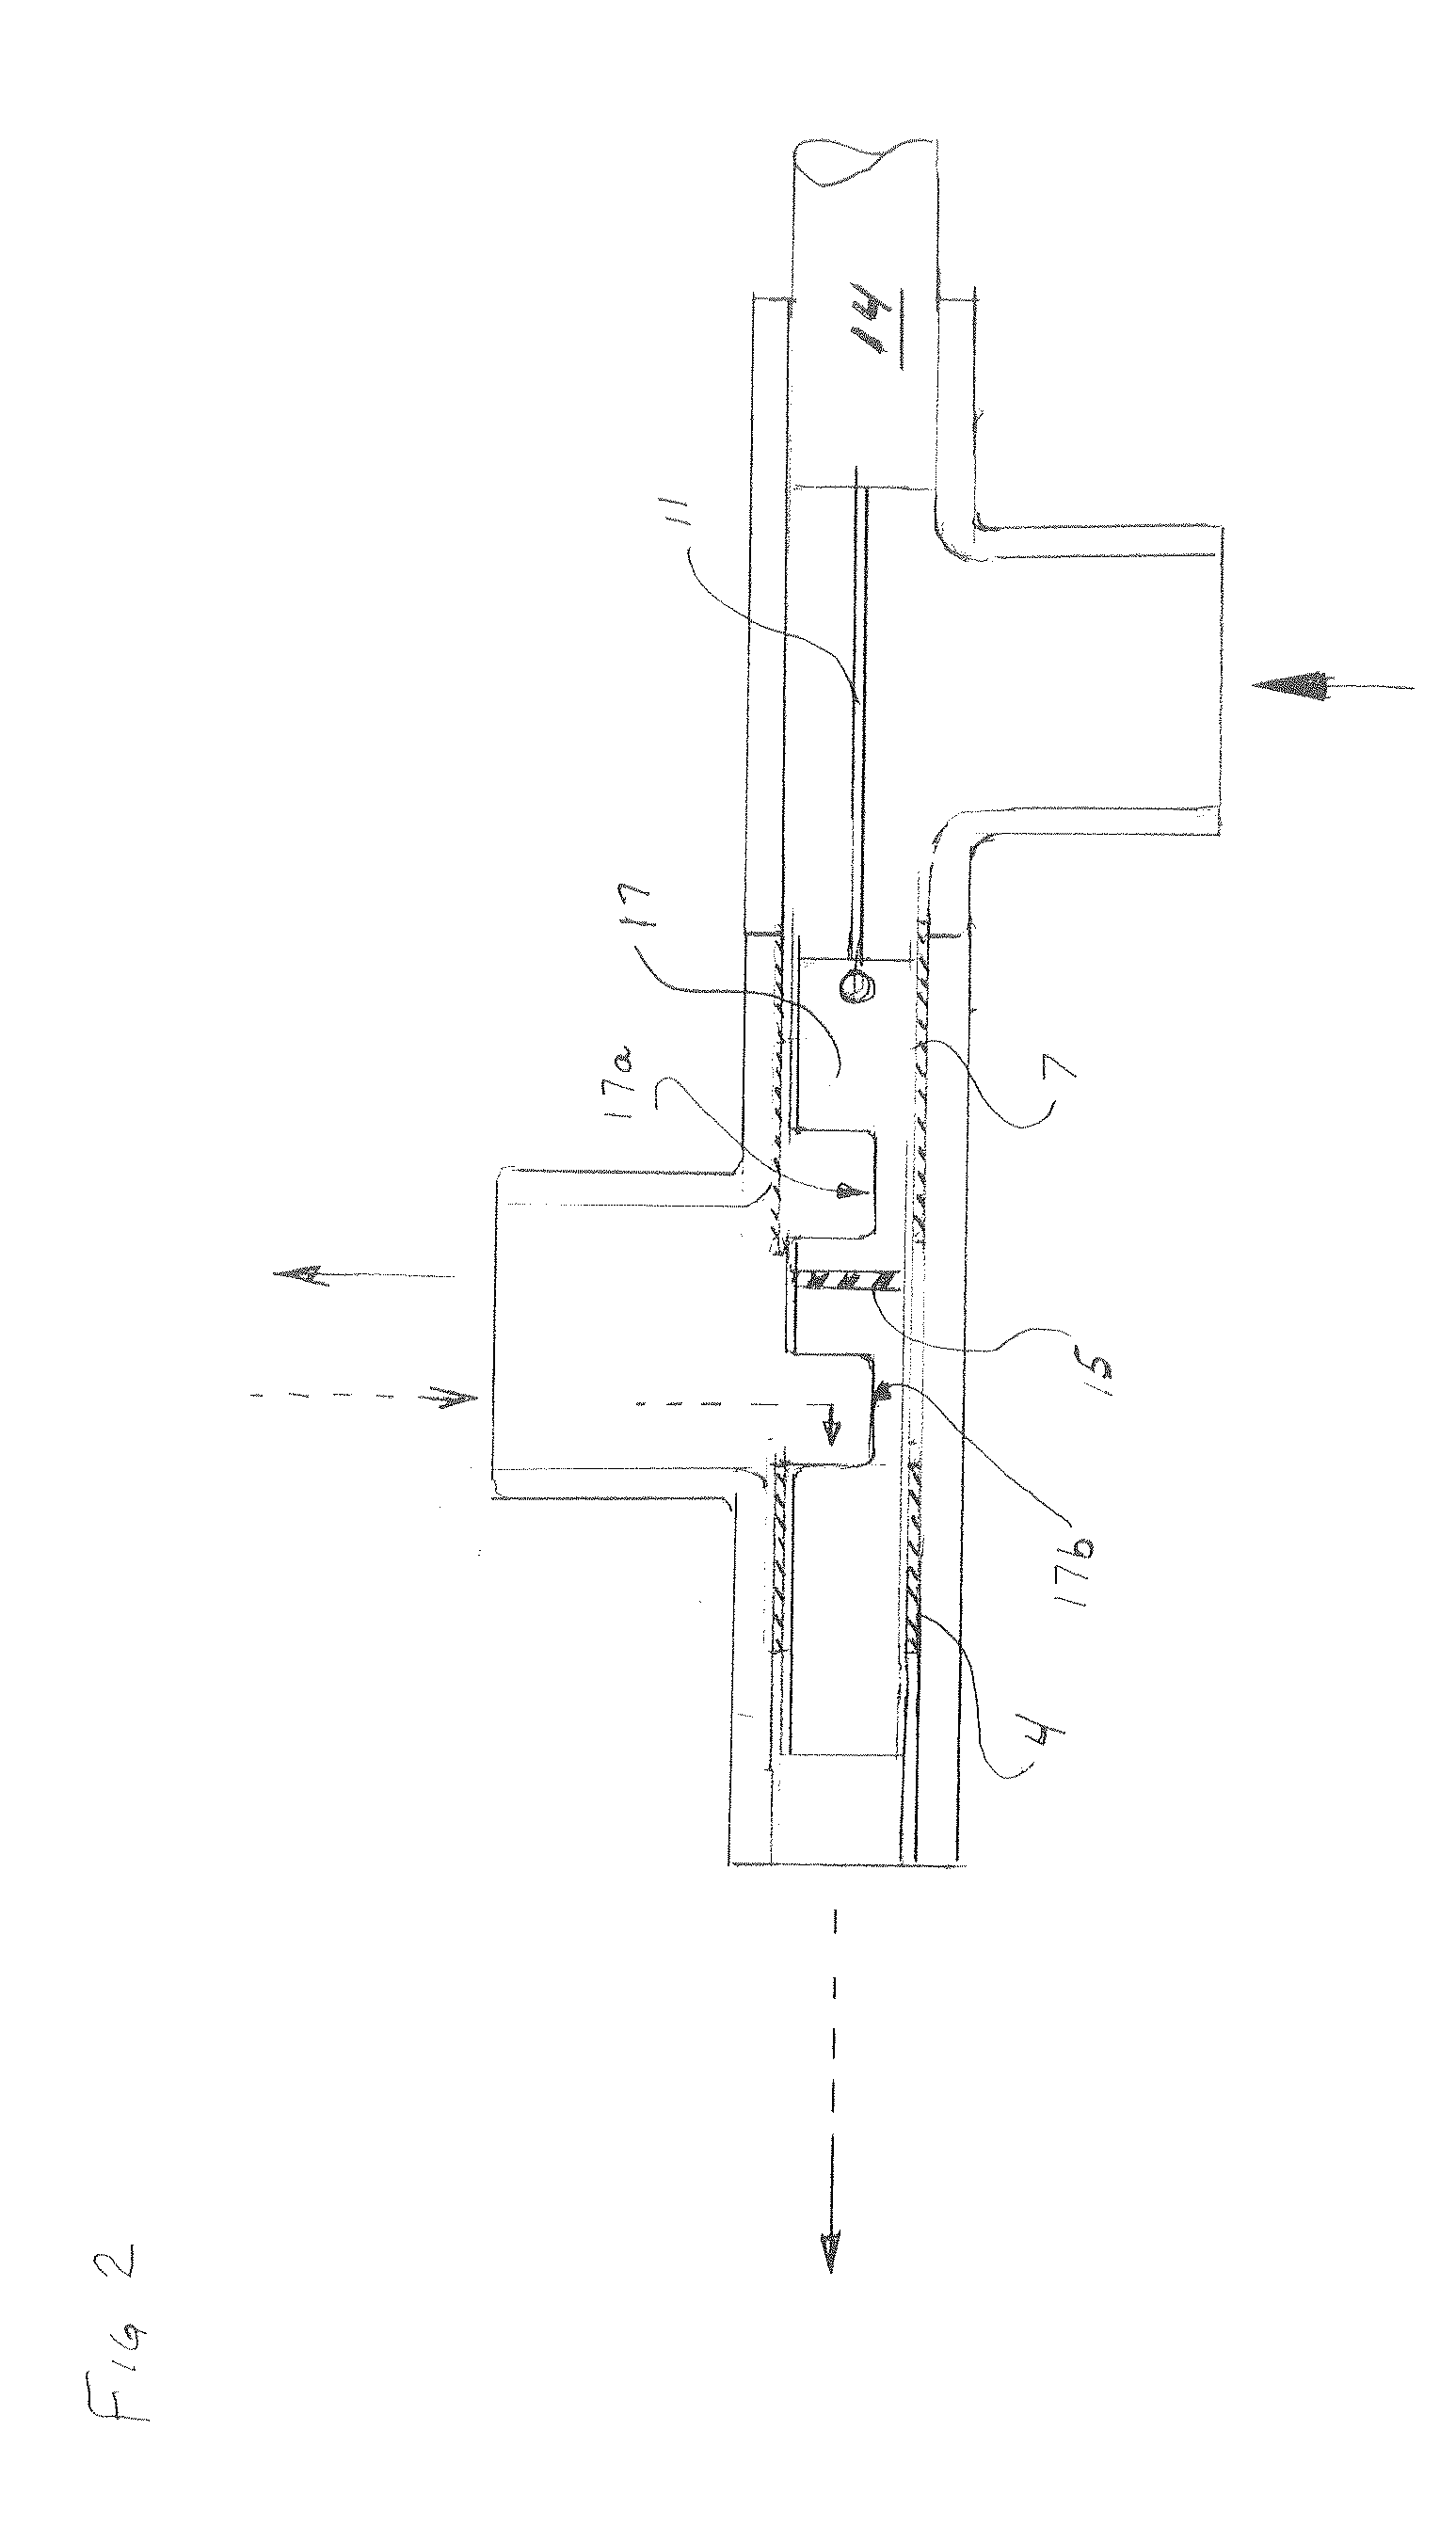 System, apparatus and method for maintaining airway patency and pressure support ventilation